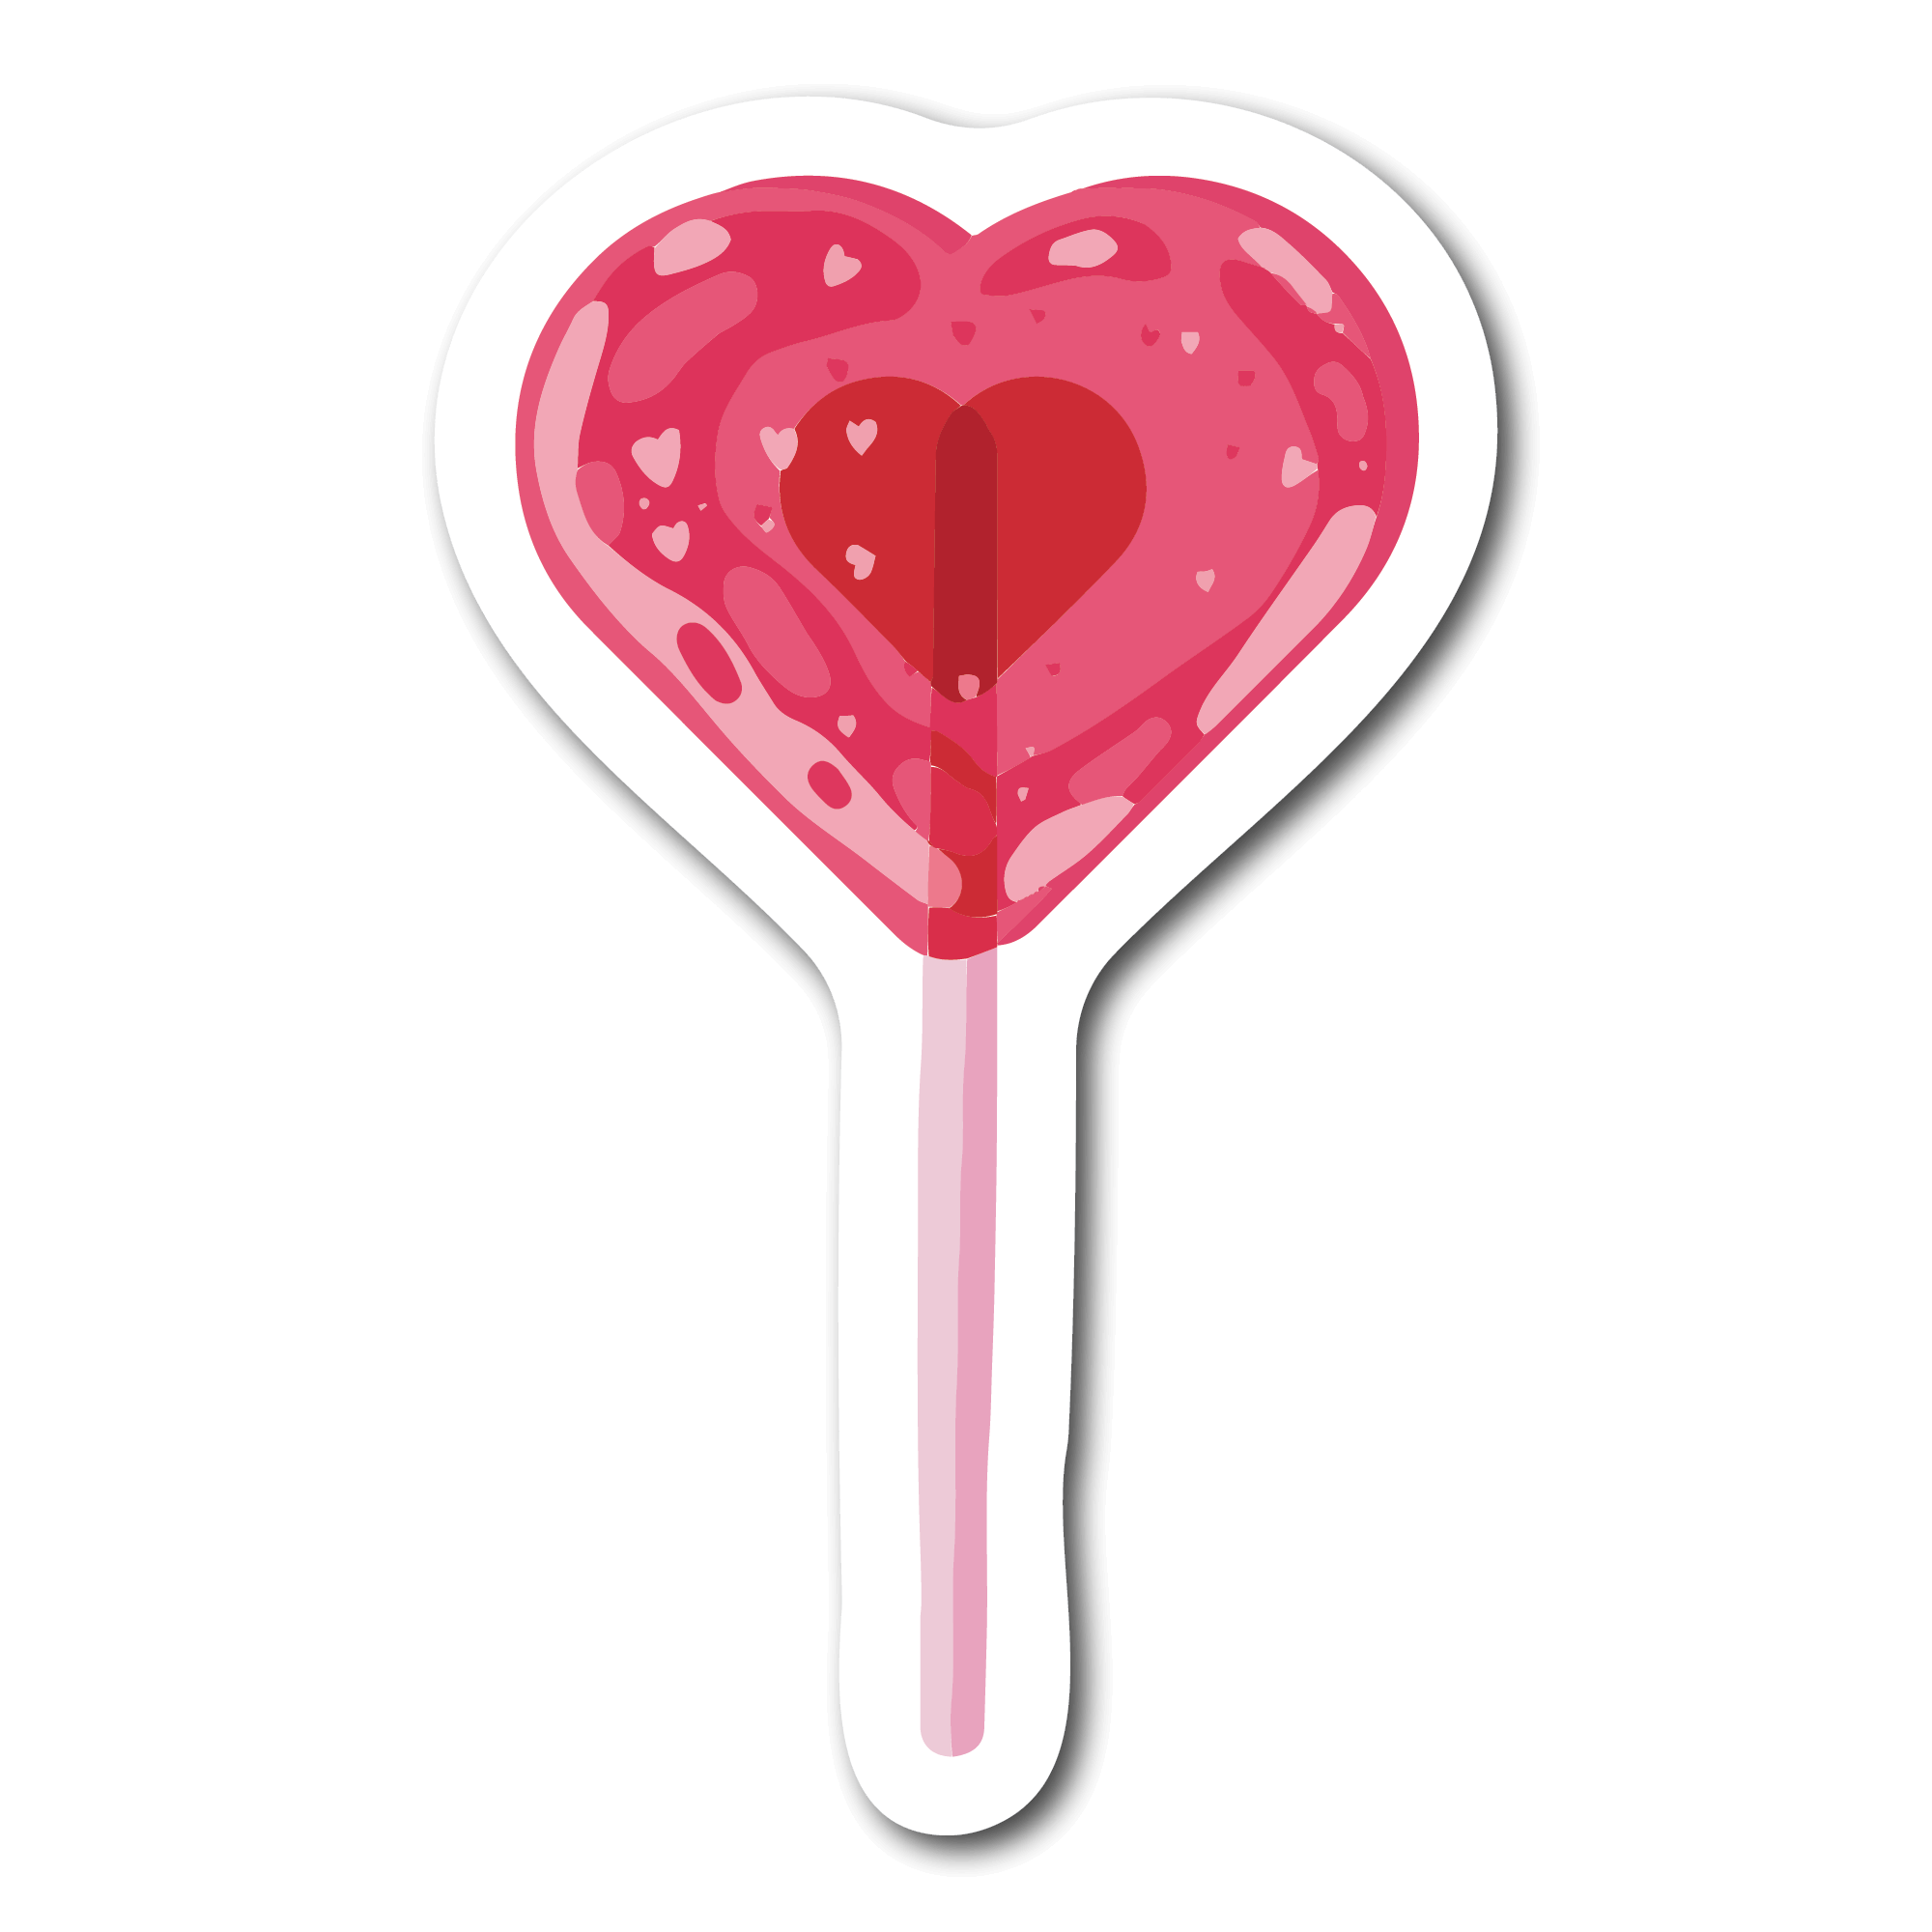 Small Sticker of a Pink Heart Shaped lollipop for phone case